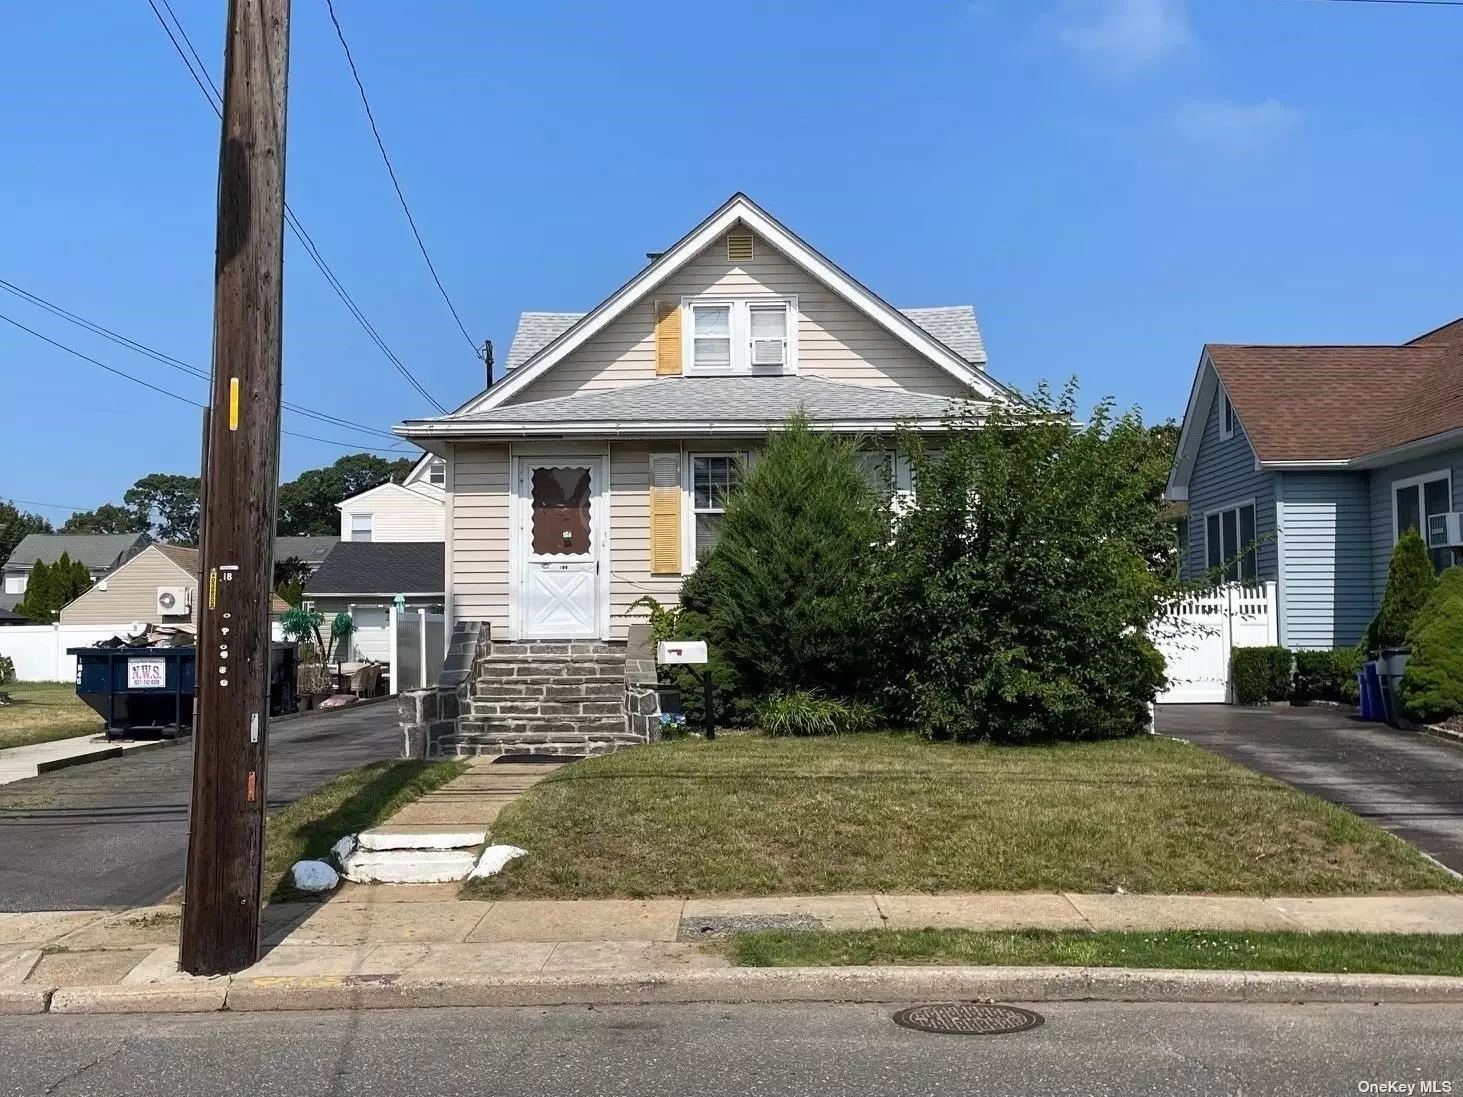 Incredible investment opportunity awaits! Endless potential in this 3BR, 2 Bath home. OSE to basement, detached garage, easy access to highways.